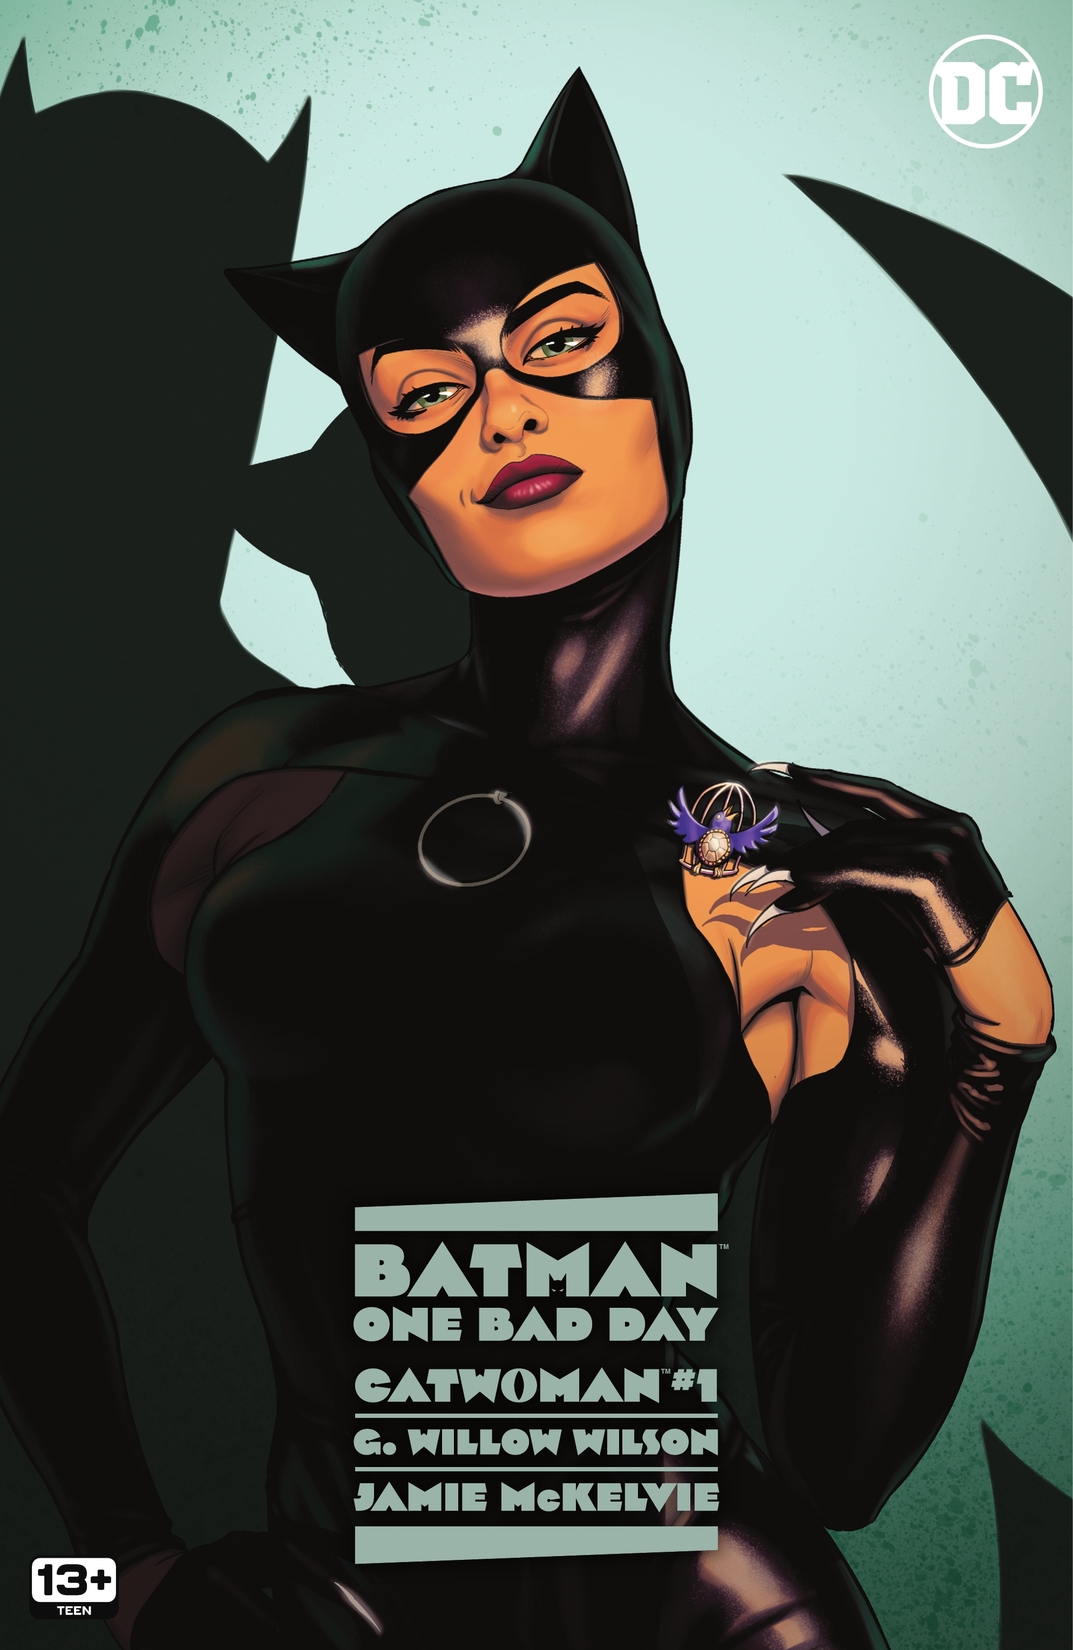 Batman - One Bad Day: Catwoman #1 preview images